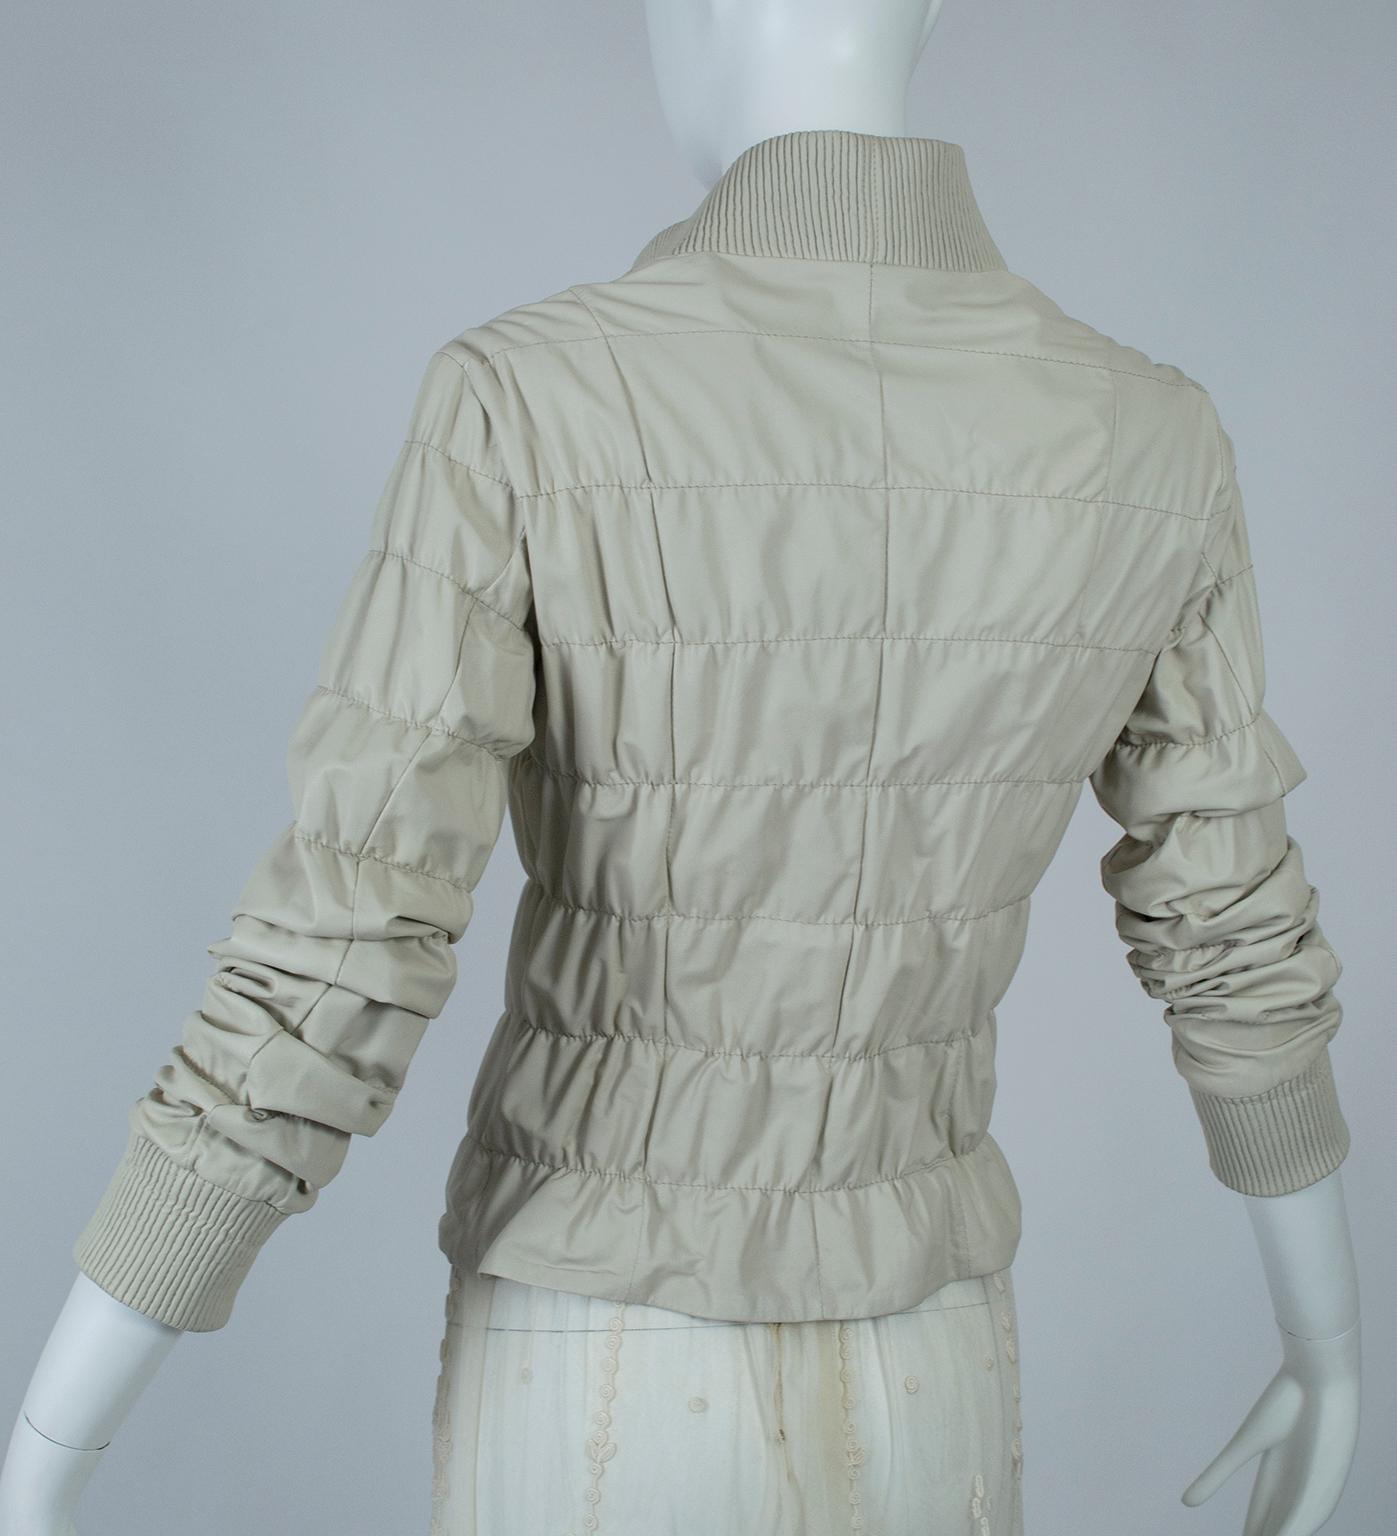 Giorgio Armani Transitional Bone Ruched Leather Moto Jacket - S, 21st Century In Excellent Condition For Sale In Tucson, AZ